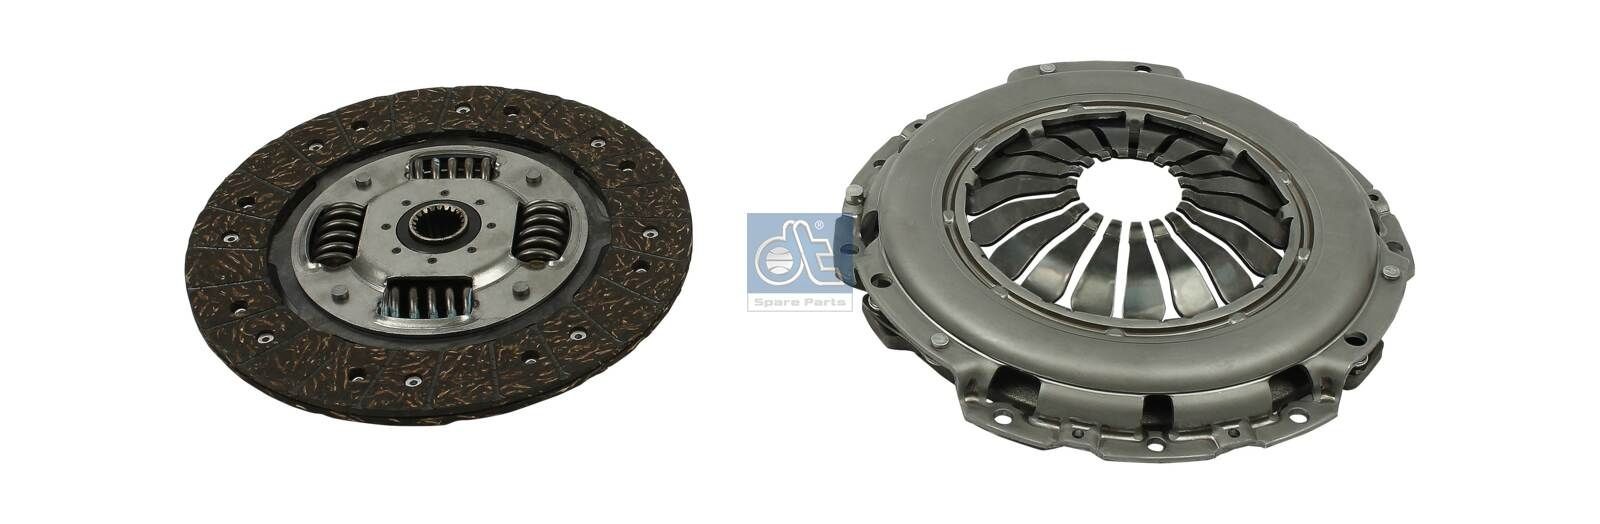 DT Spare Parts 6.93044 Clutch kit RENAULT experience and price